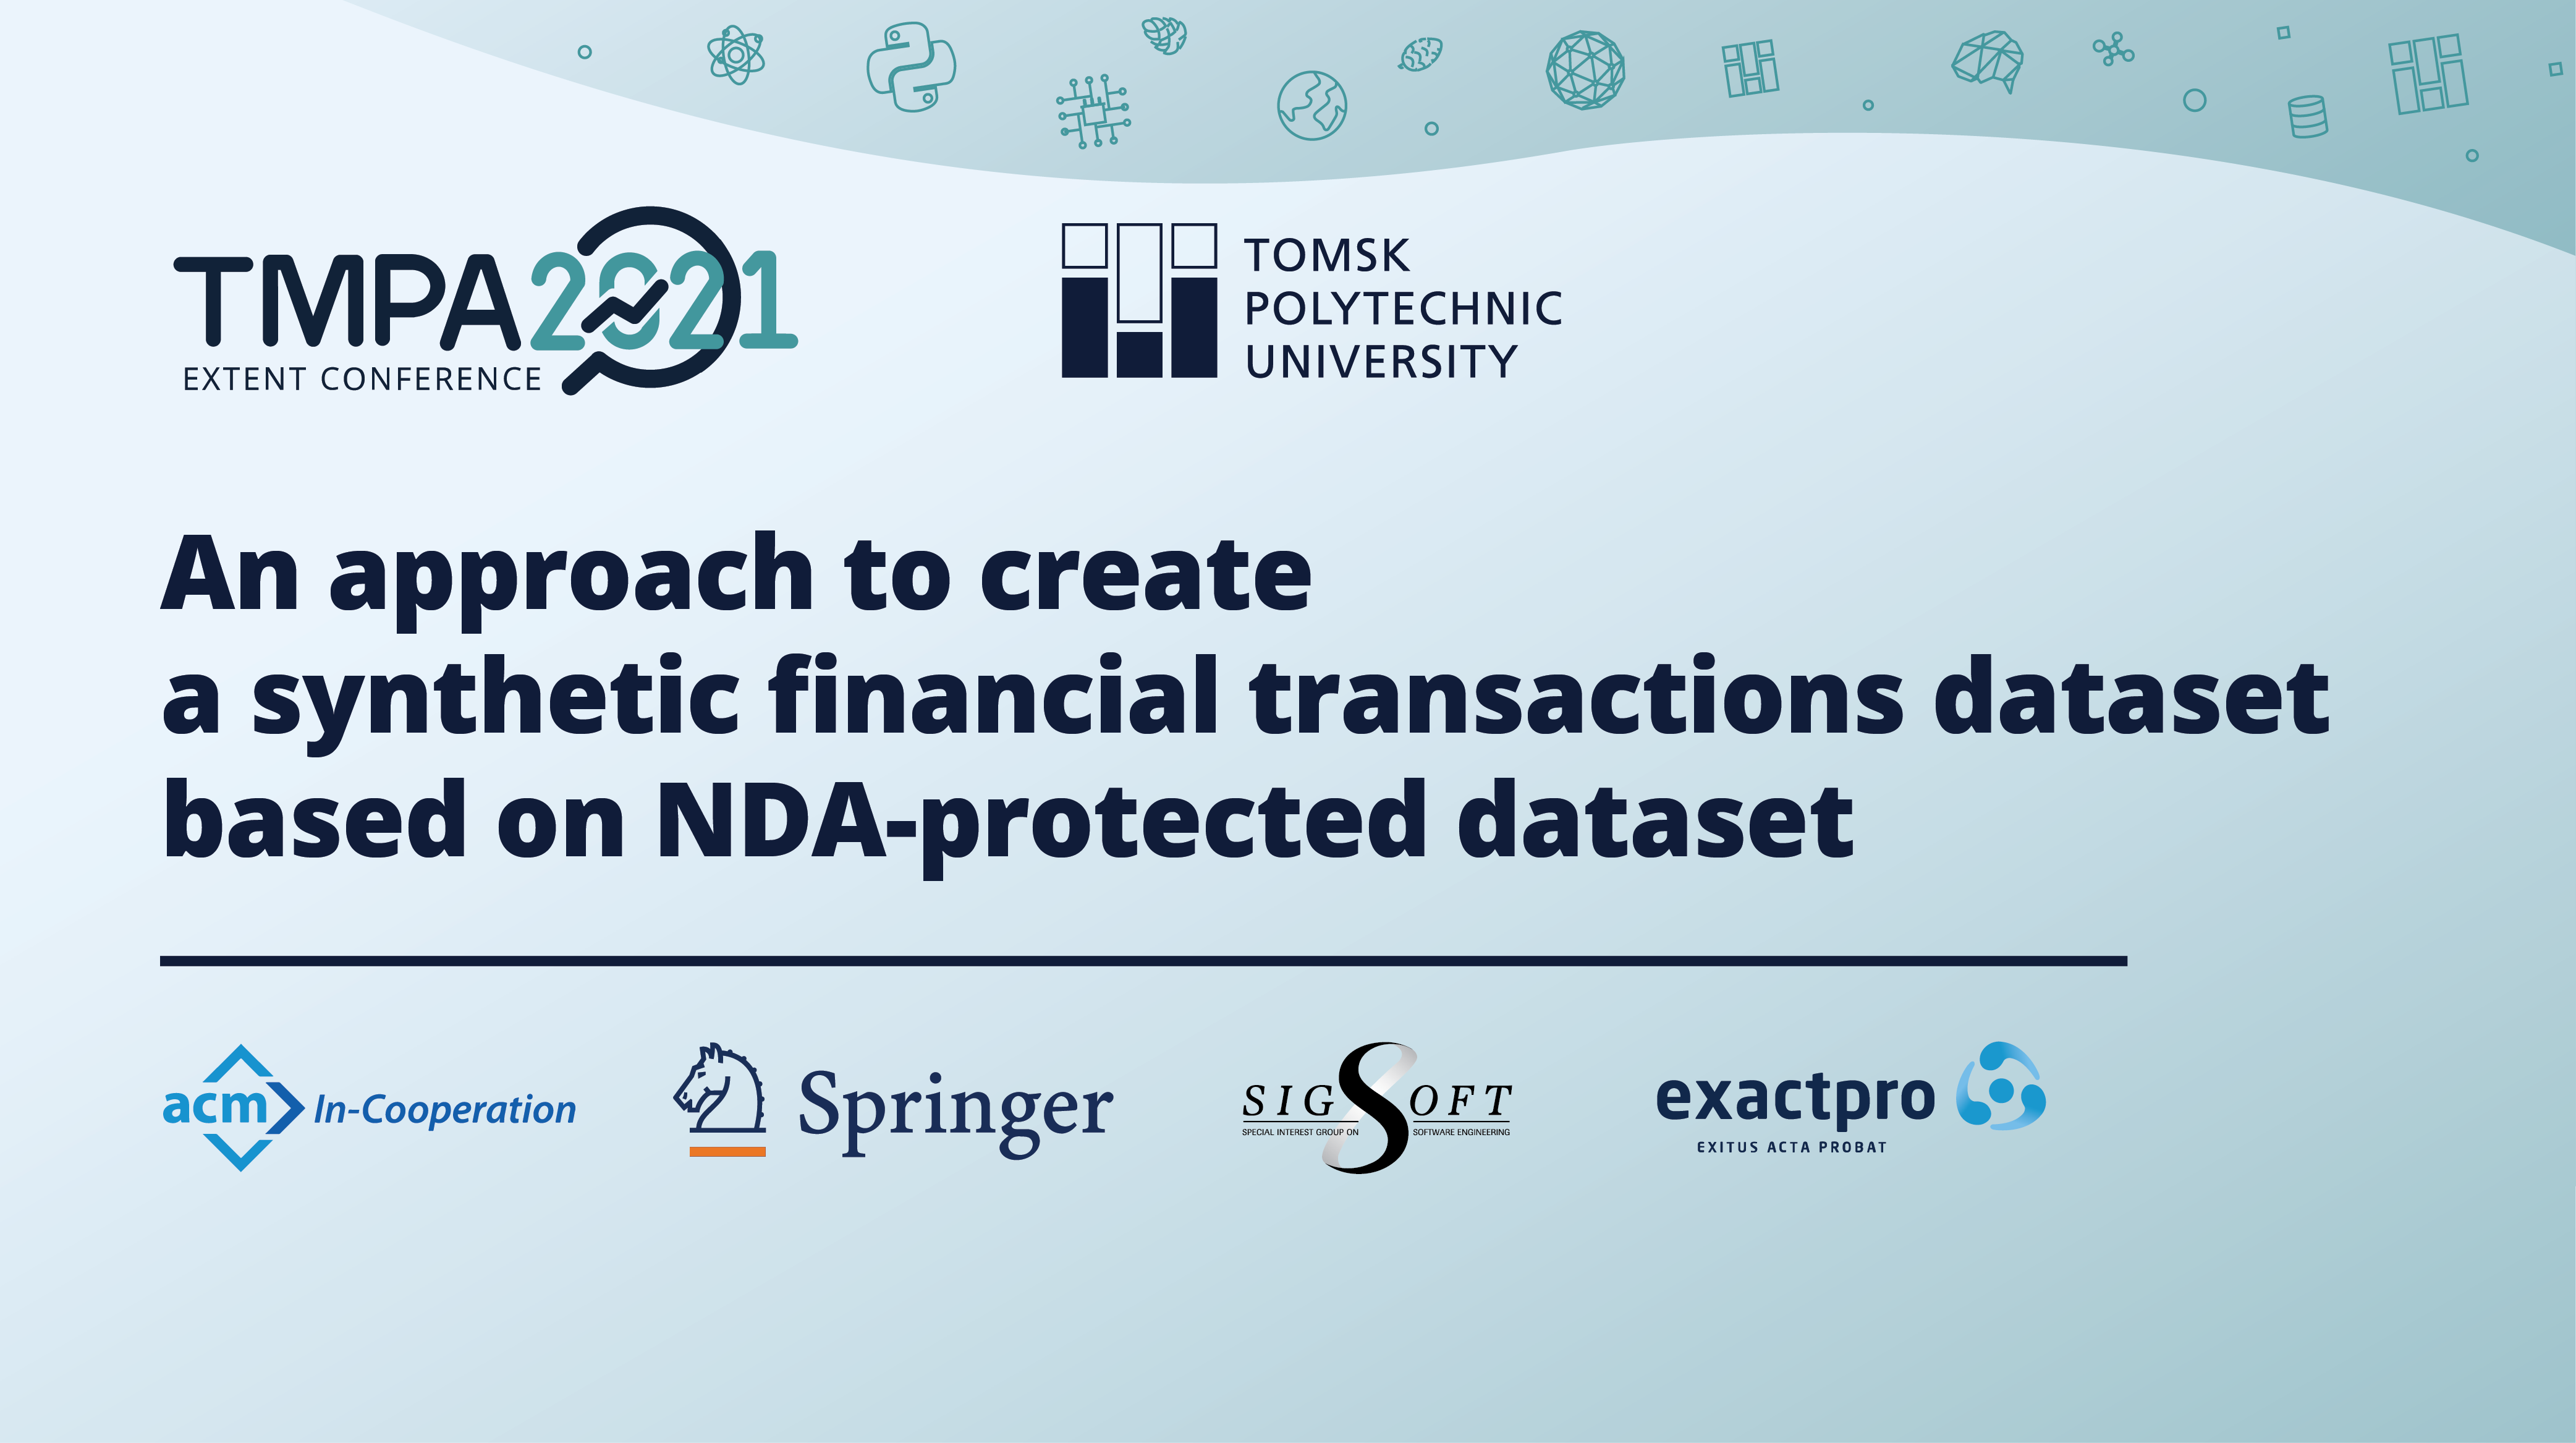 An approach to create a synthetic financial transactions dataset based on NDA-protected dataset